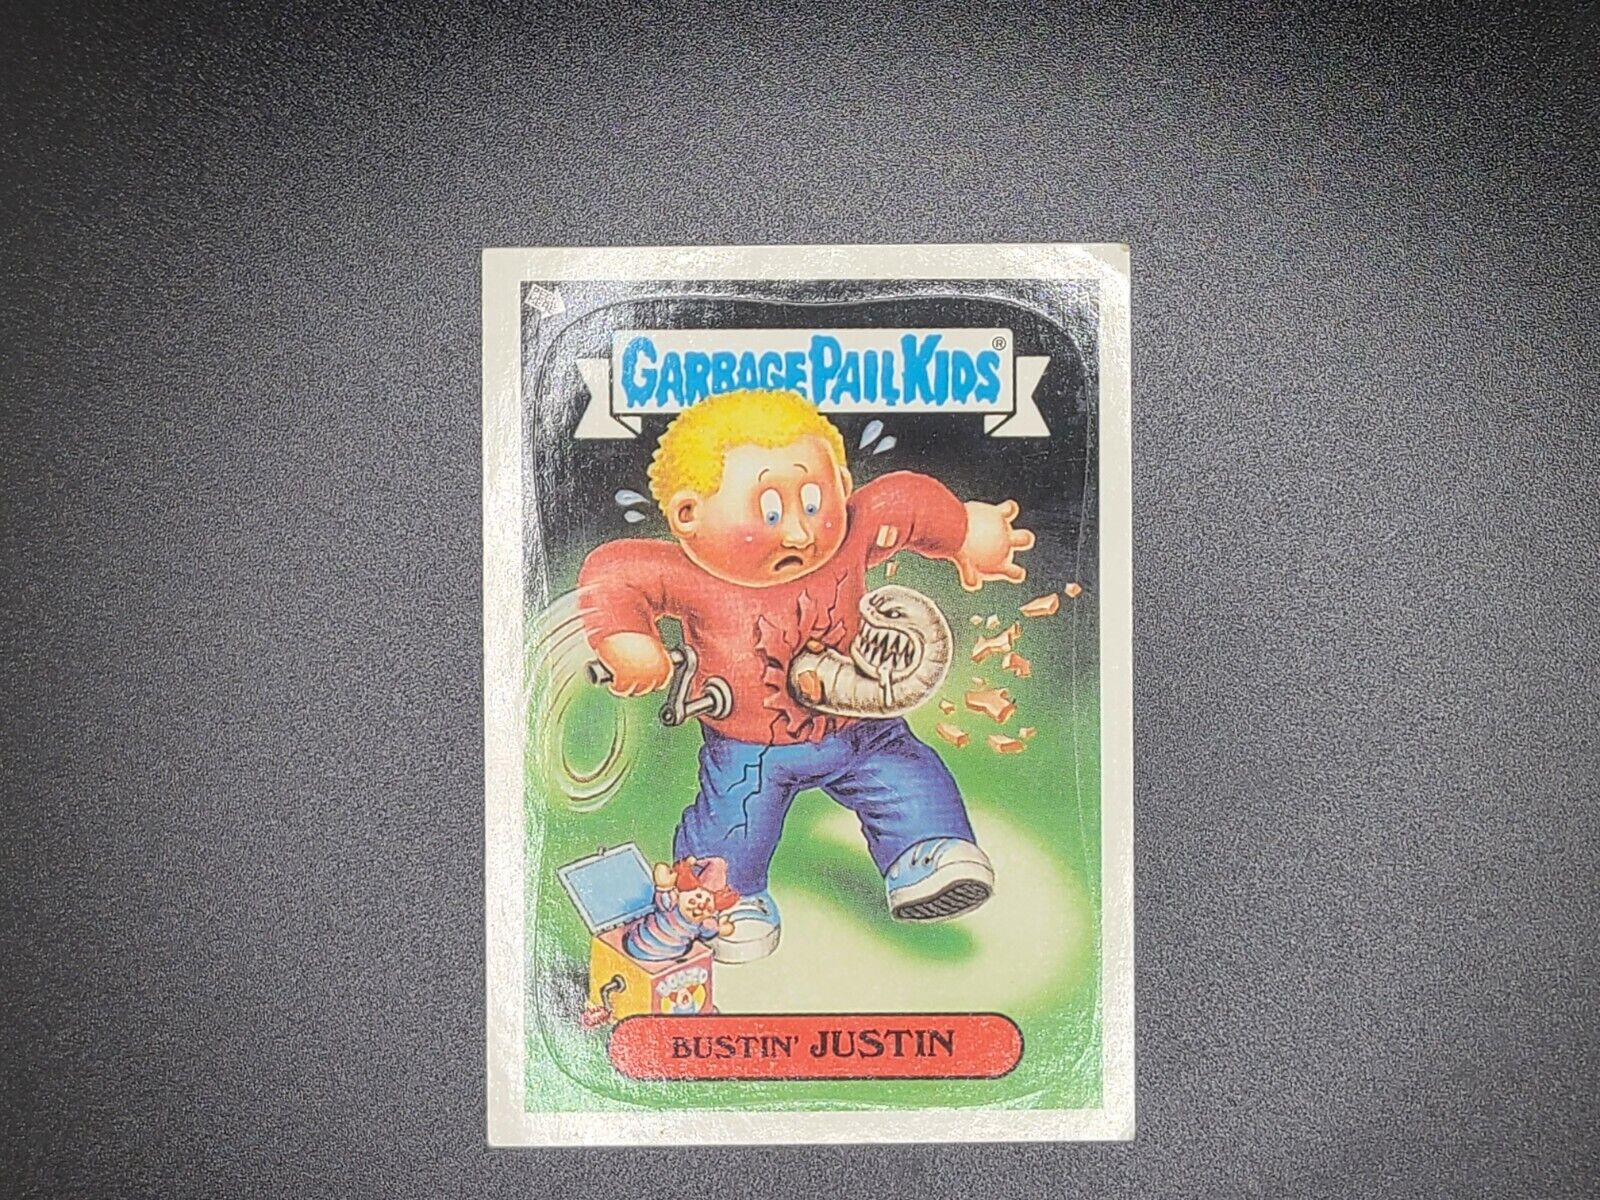 Topps Garbage Pail Kids All New Series 1-7, Parallels, Single Cards, You Pick